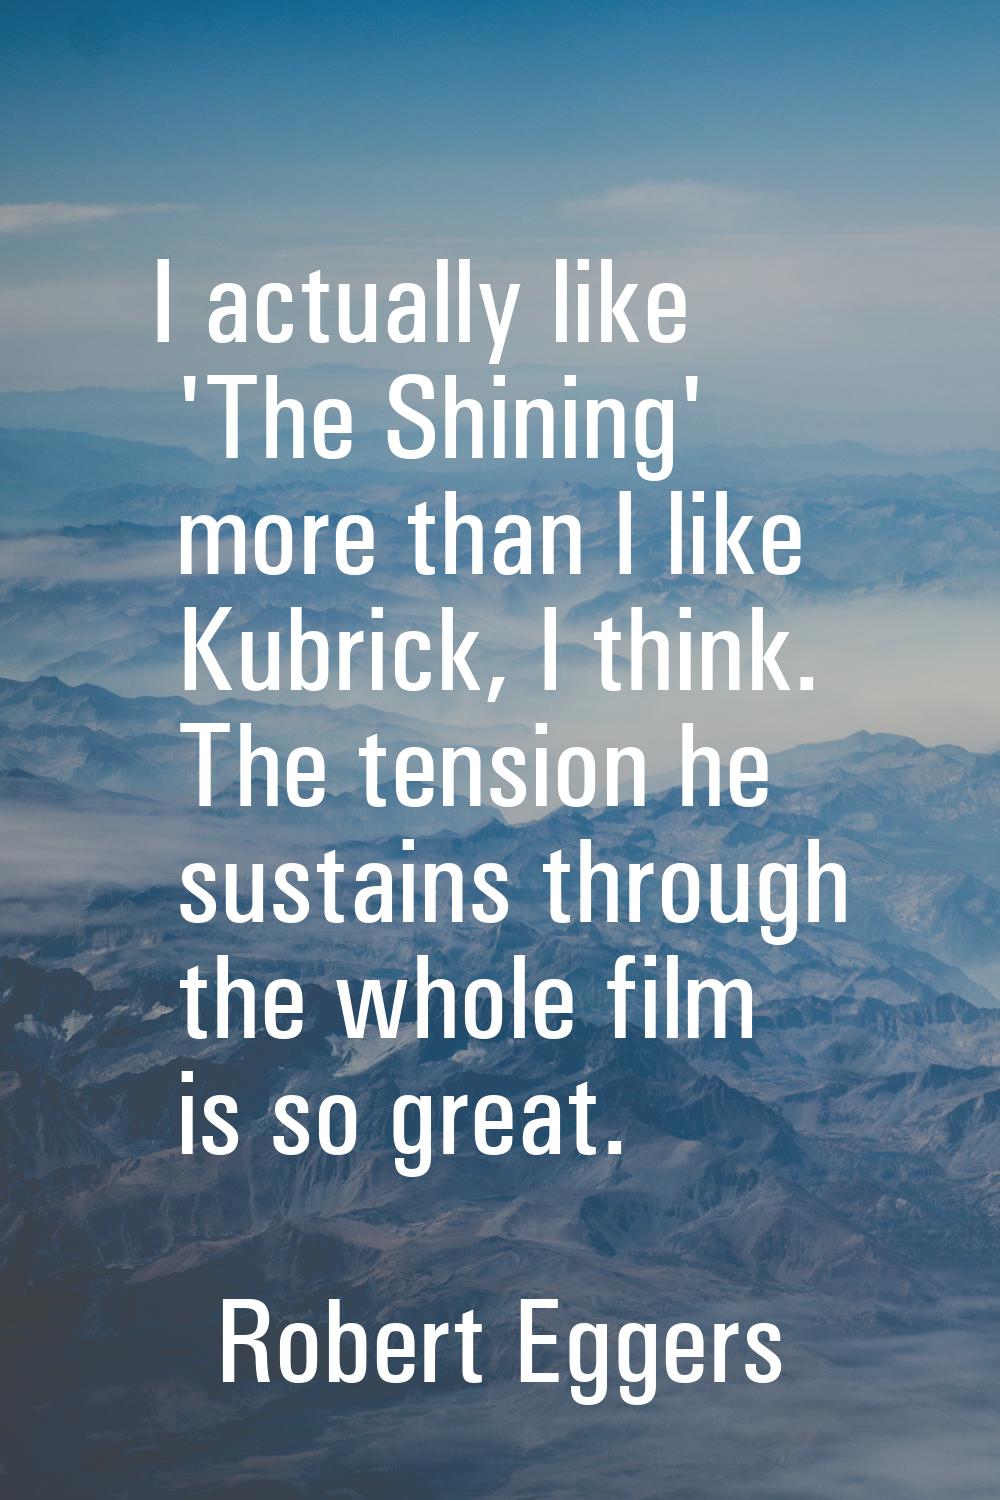 I actually like 'The Shining' more than I like Kubrick, I think. The tension he sustains through th